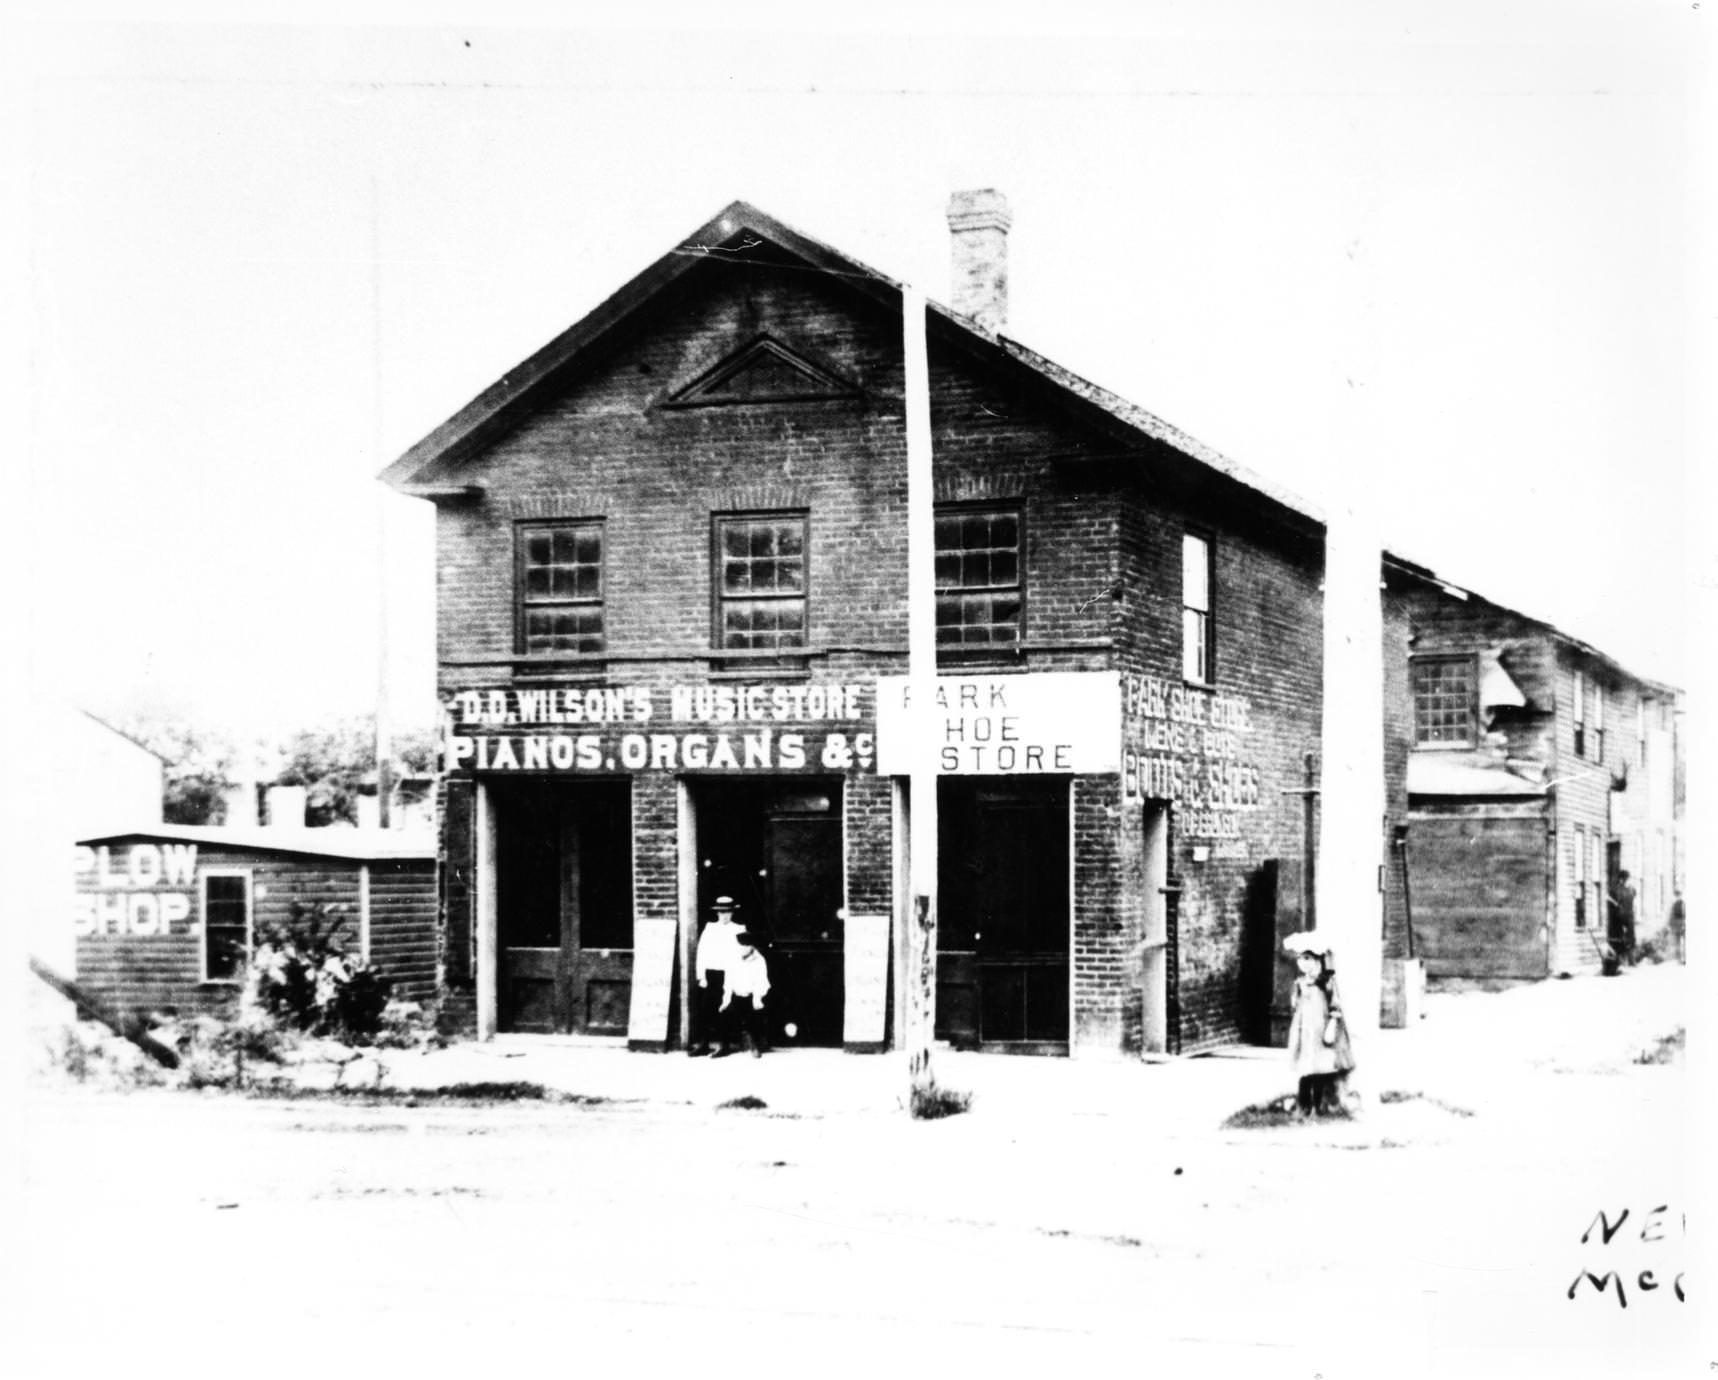 D. D. Wilson's Music Store and the Park Shoe Store, at the northwest corner of Court and Main Streets, 1870